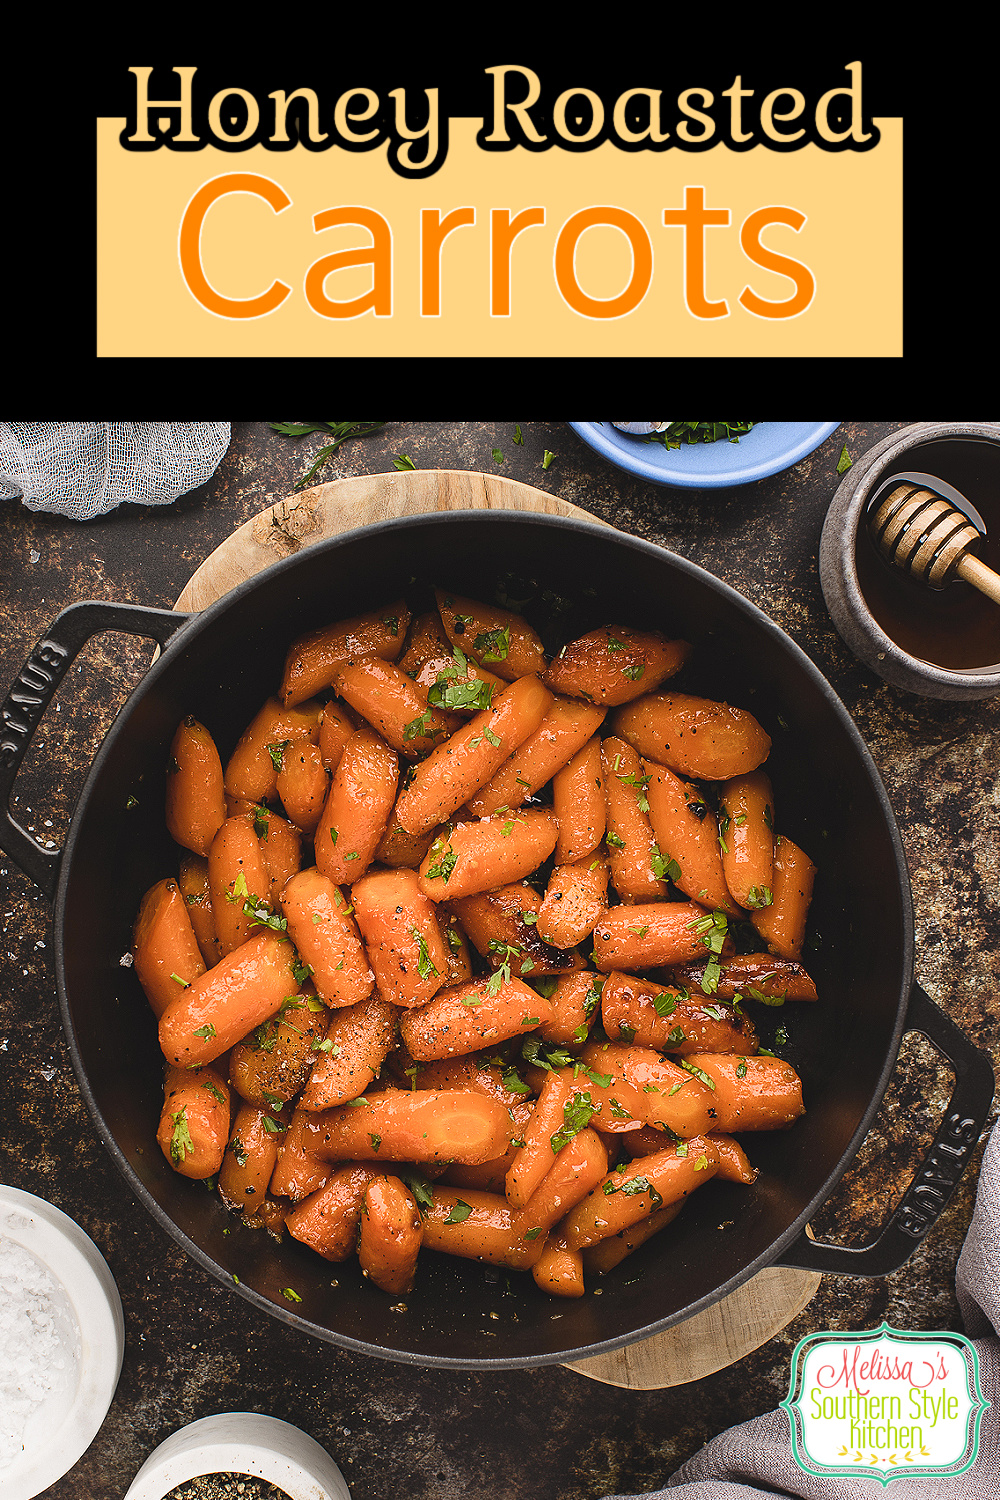 This recipe for Honey Roasted Carrots features a sweet honey butter glaze and simple seasonings to bring out the natural roasted flavor #roastedcarrots #honeyroastedcarrots #glazedcarrots #carrotrecipes #howtoroastcarrots #honeybutterglaze